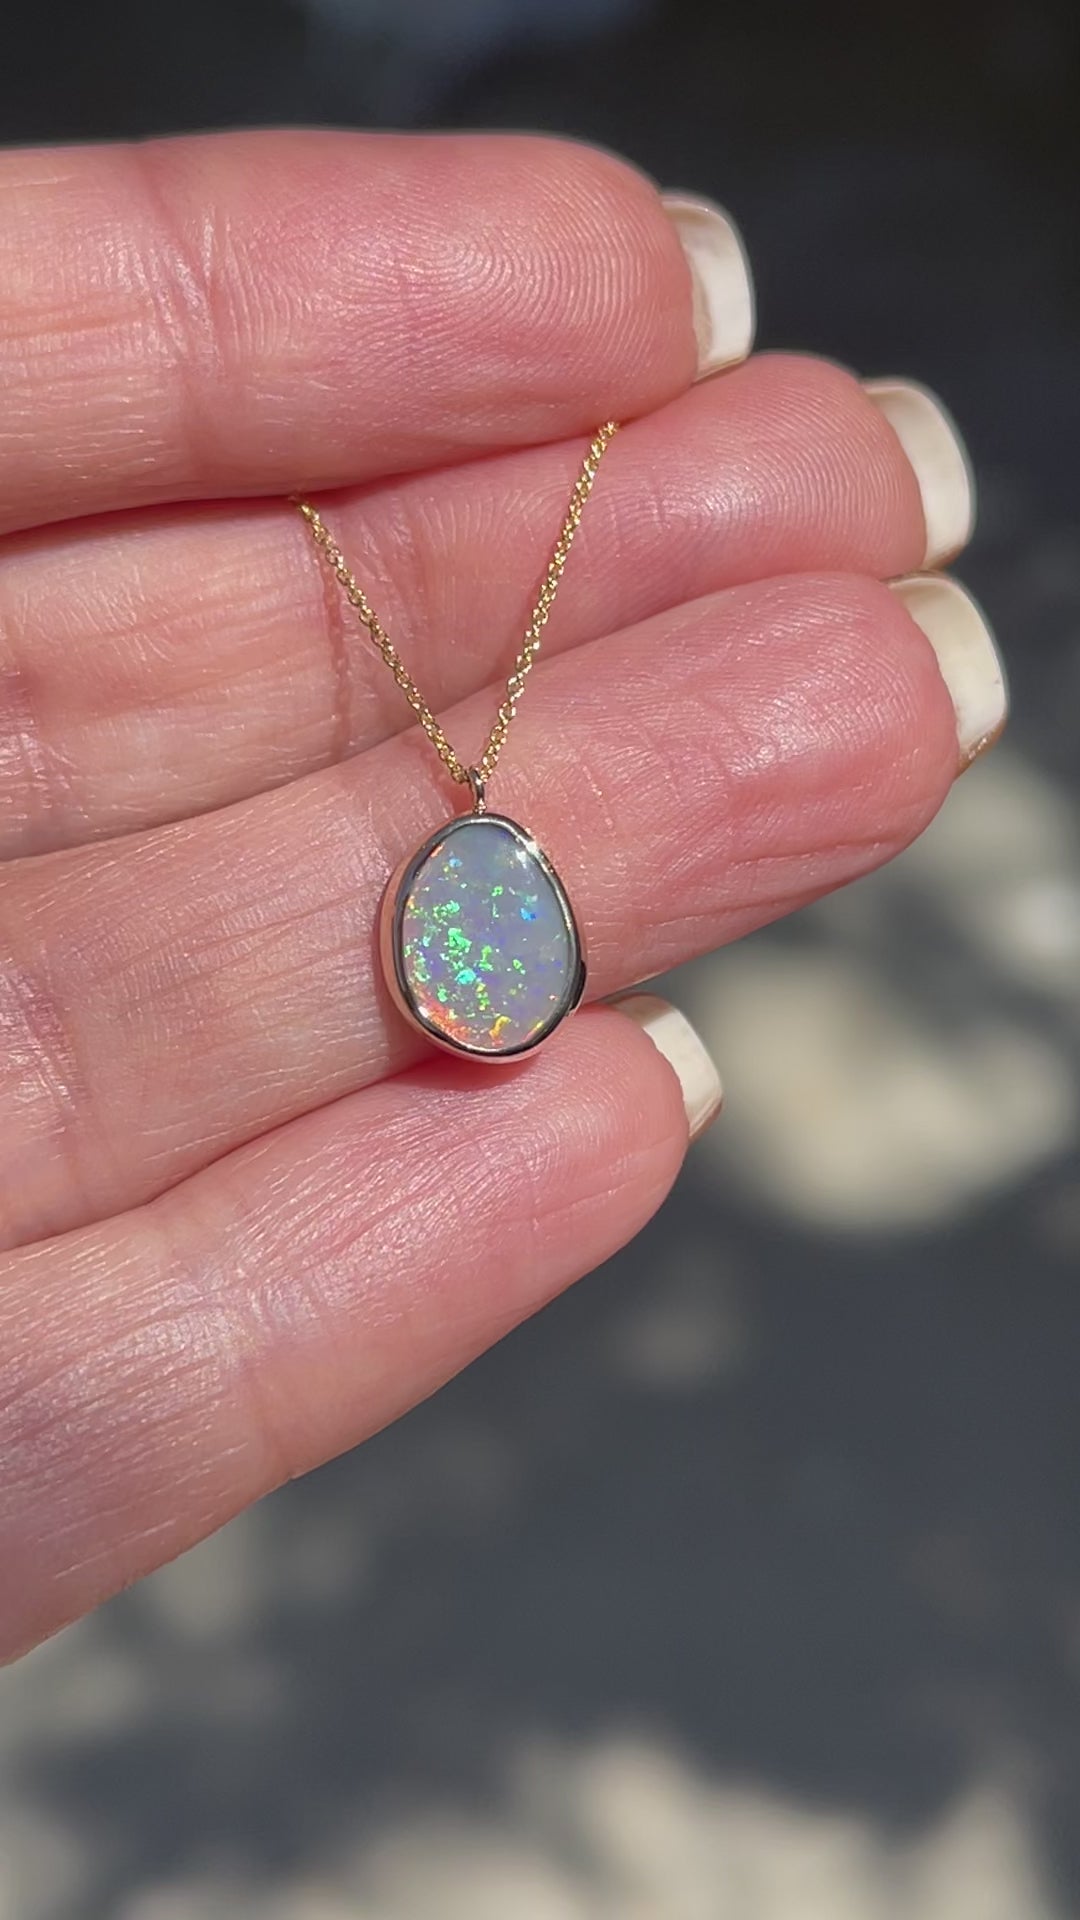 Video of an Australian Opal Necklace by NIXIN Jewelry showing the green and coral flash of the Lightning Ridge Black Opal.